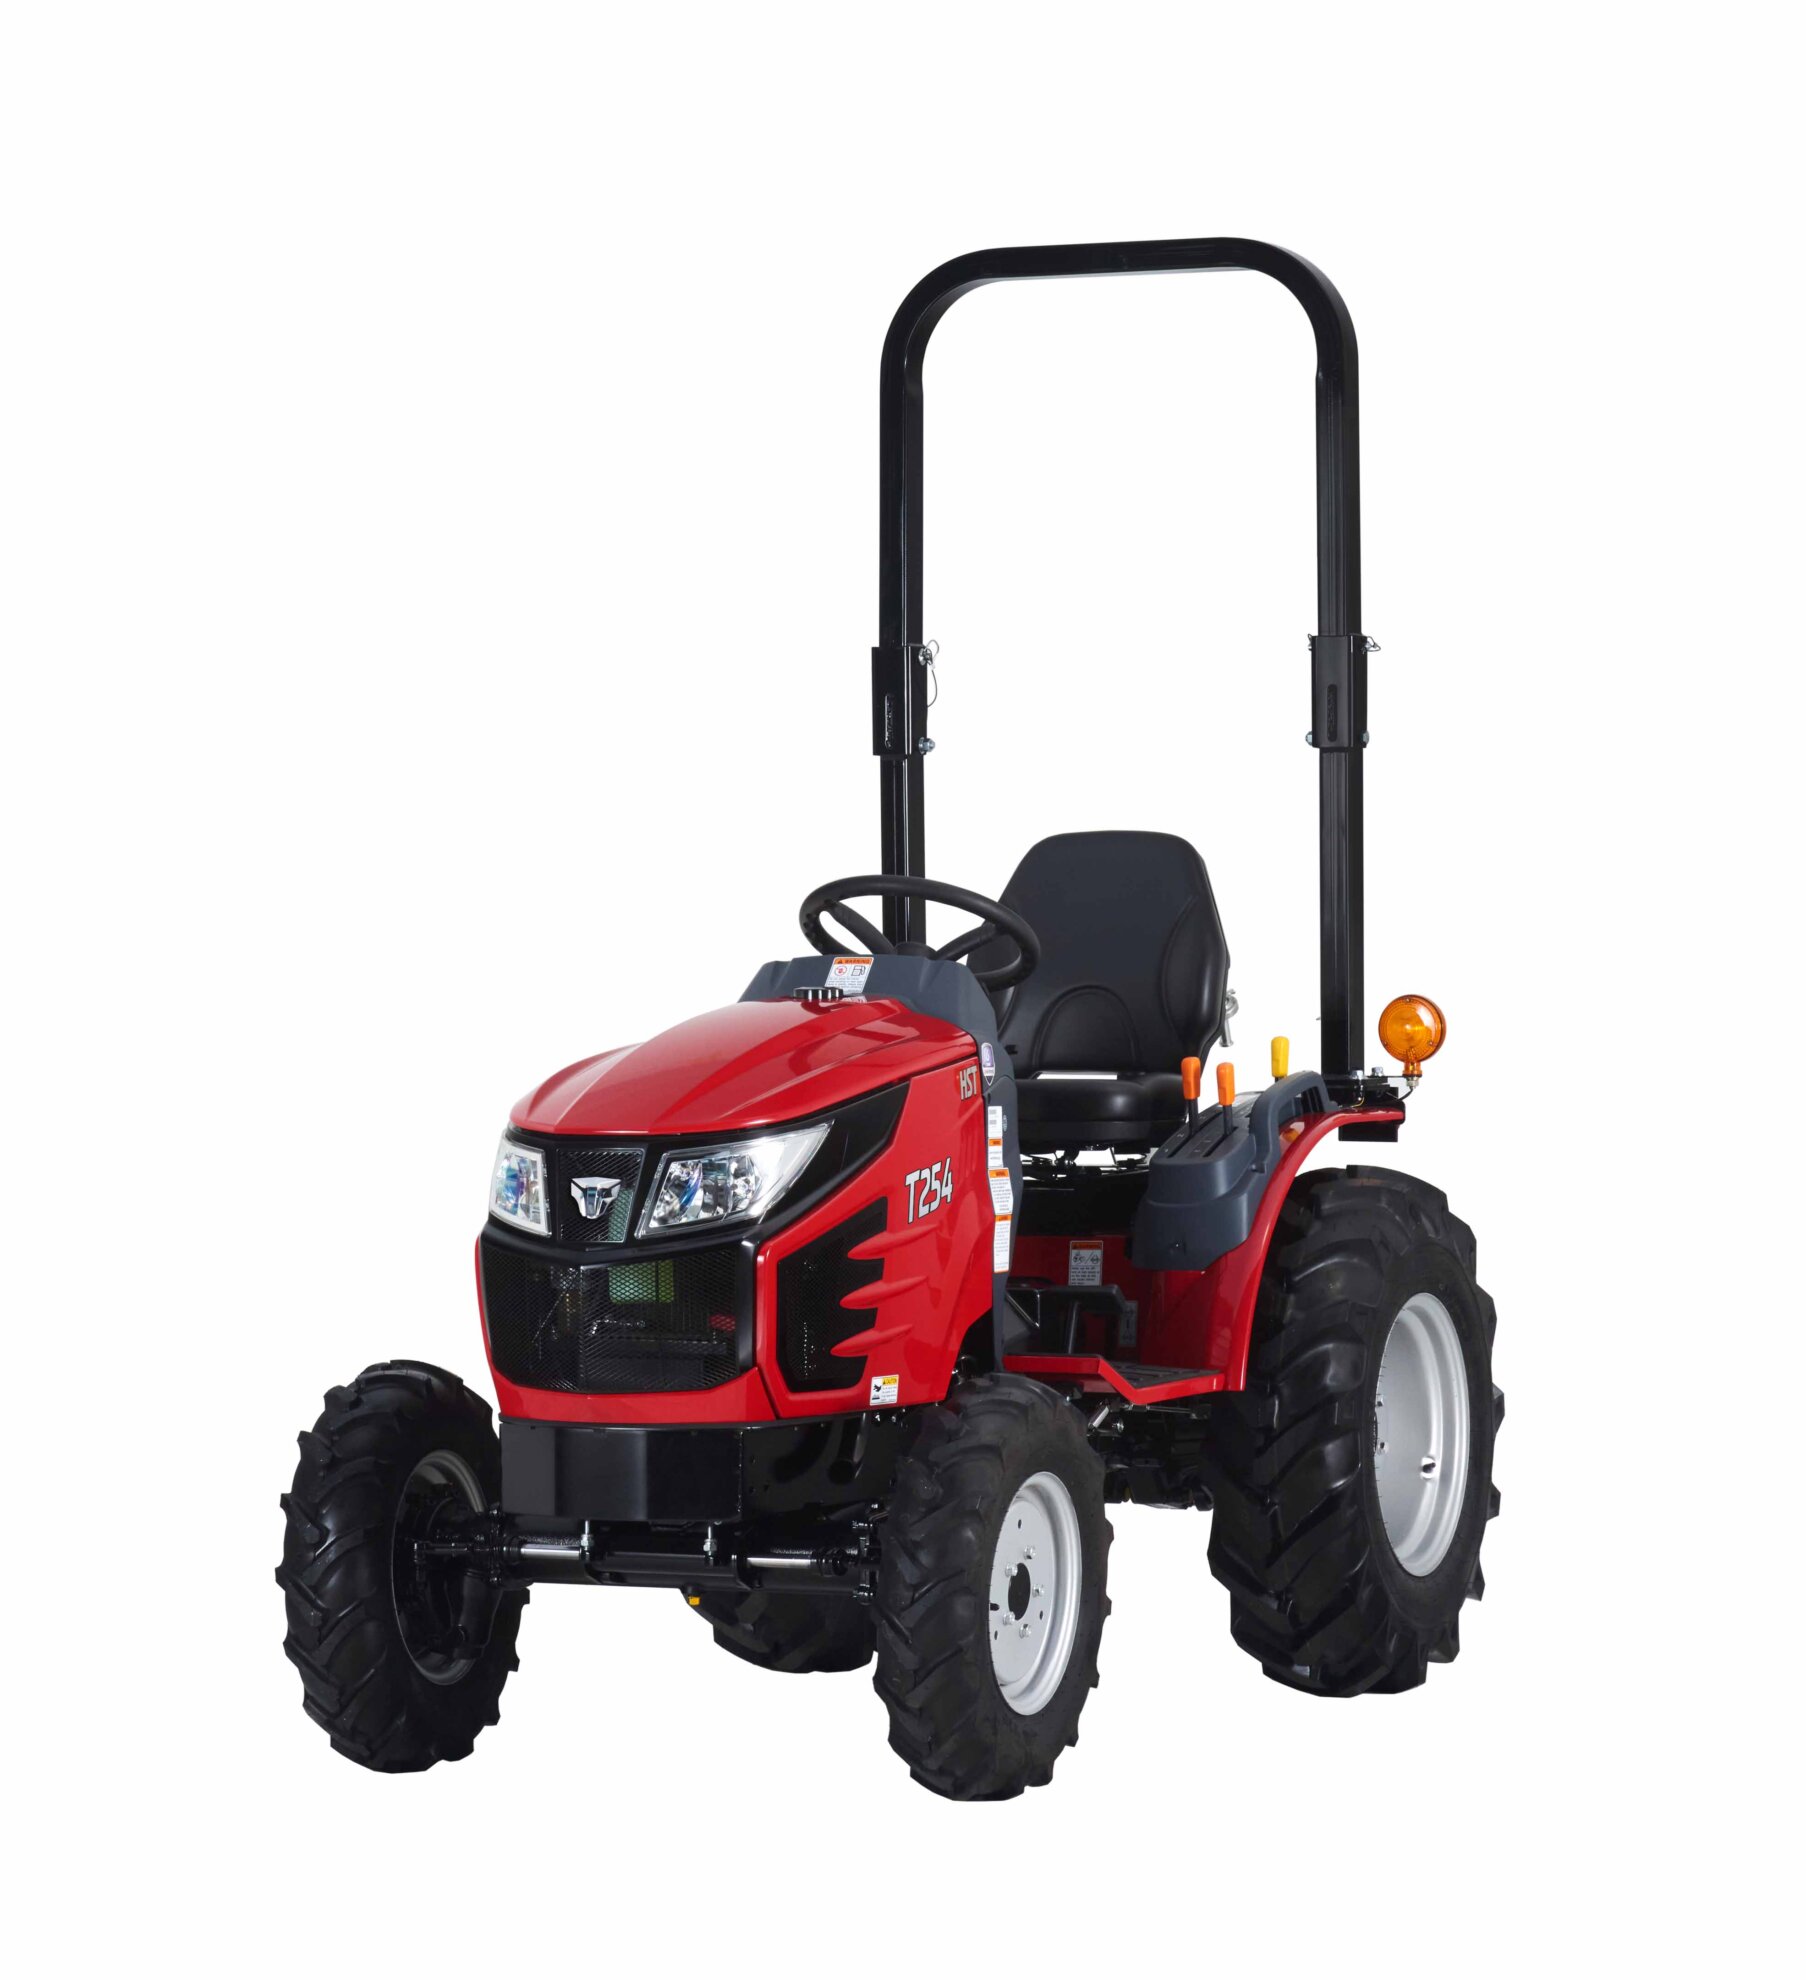 Tym/Branson sub-compact tractor model 2505H (Hydr. drive)